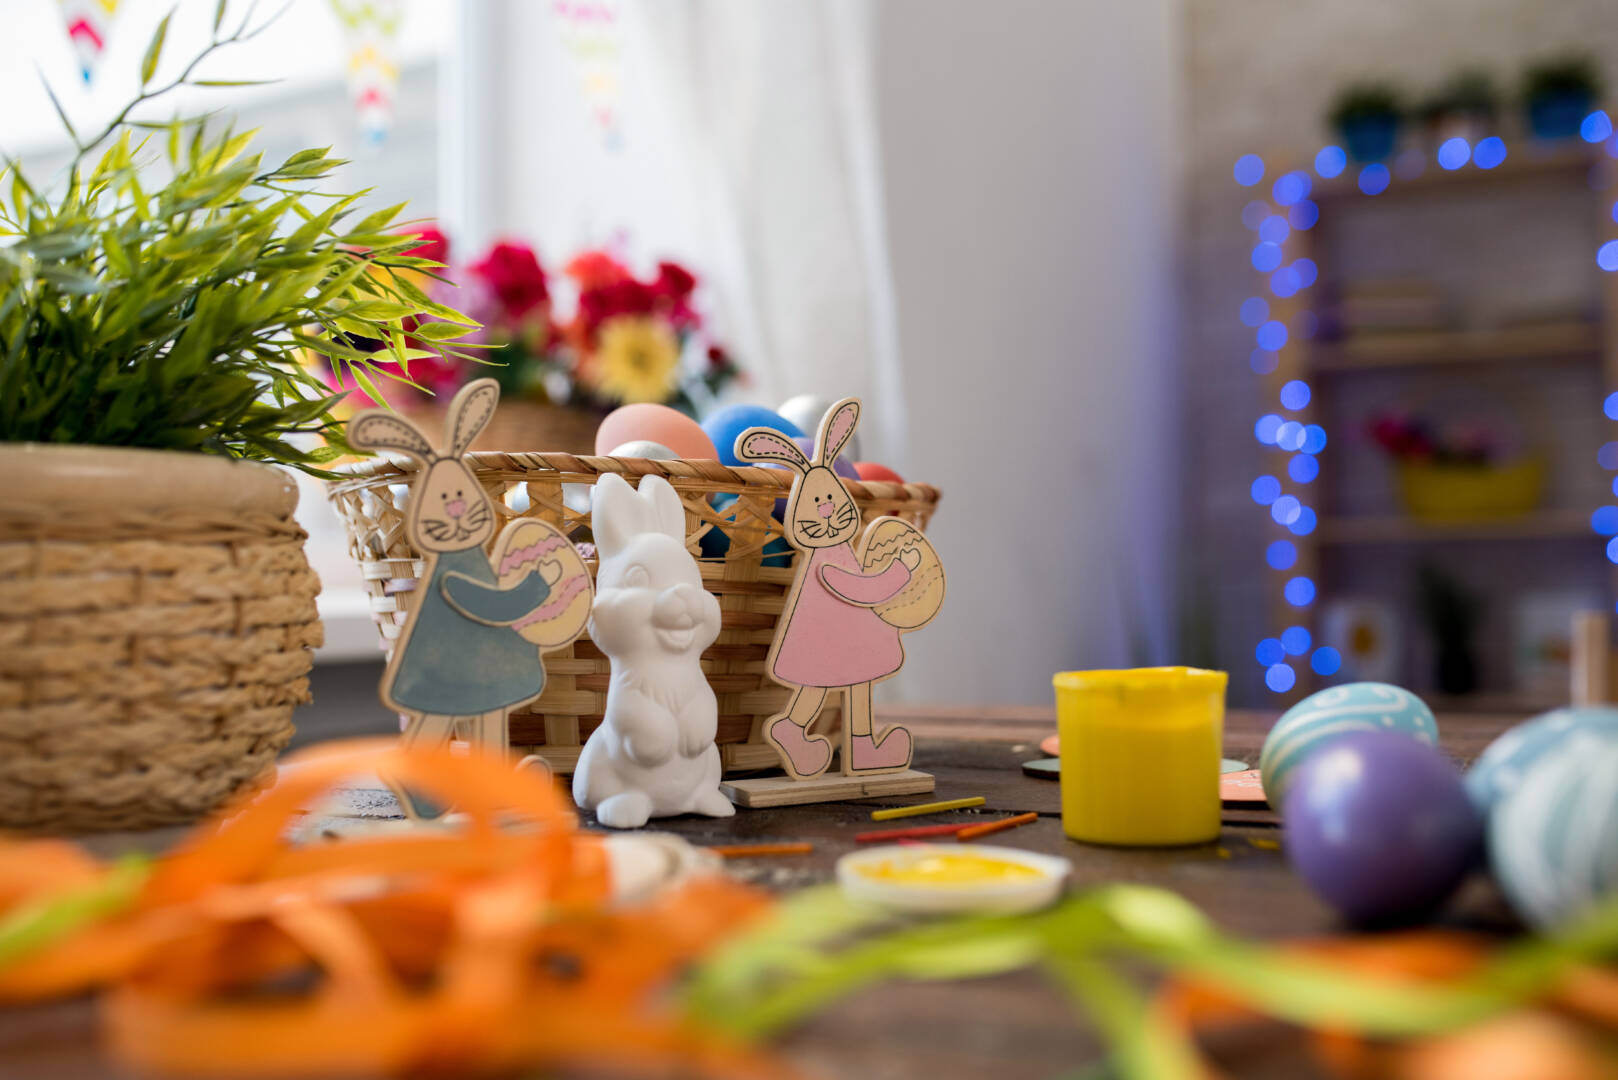 Background image of three Easter bunny figurines on decorated table with basket of eggs, copy space background